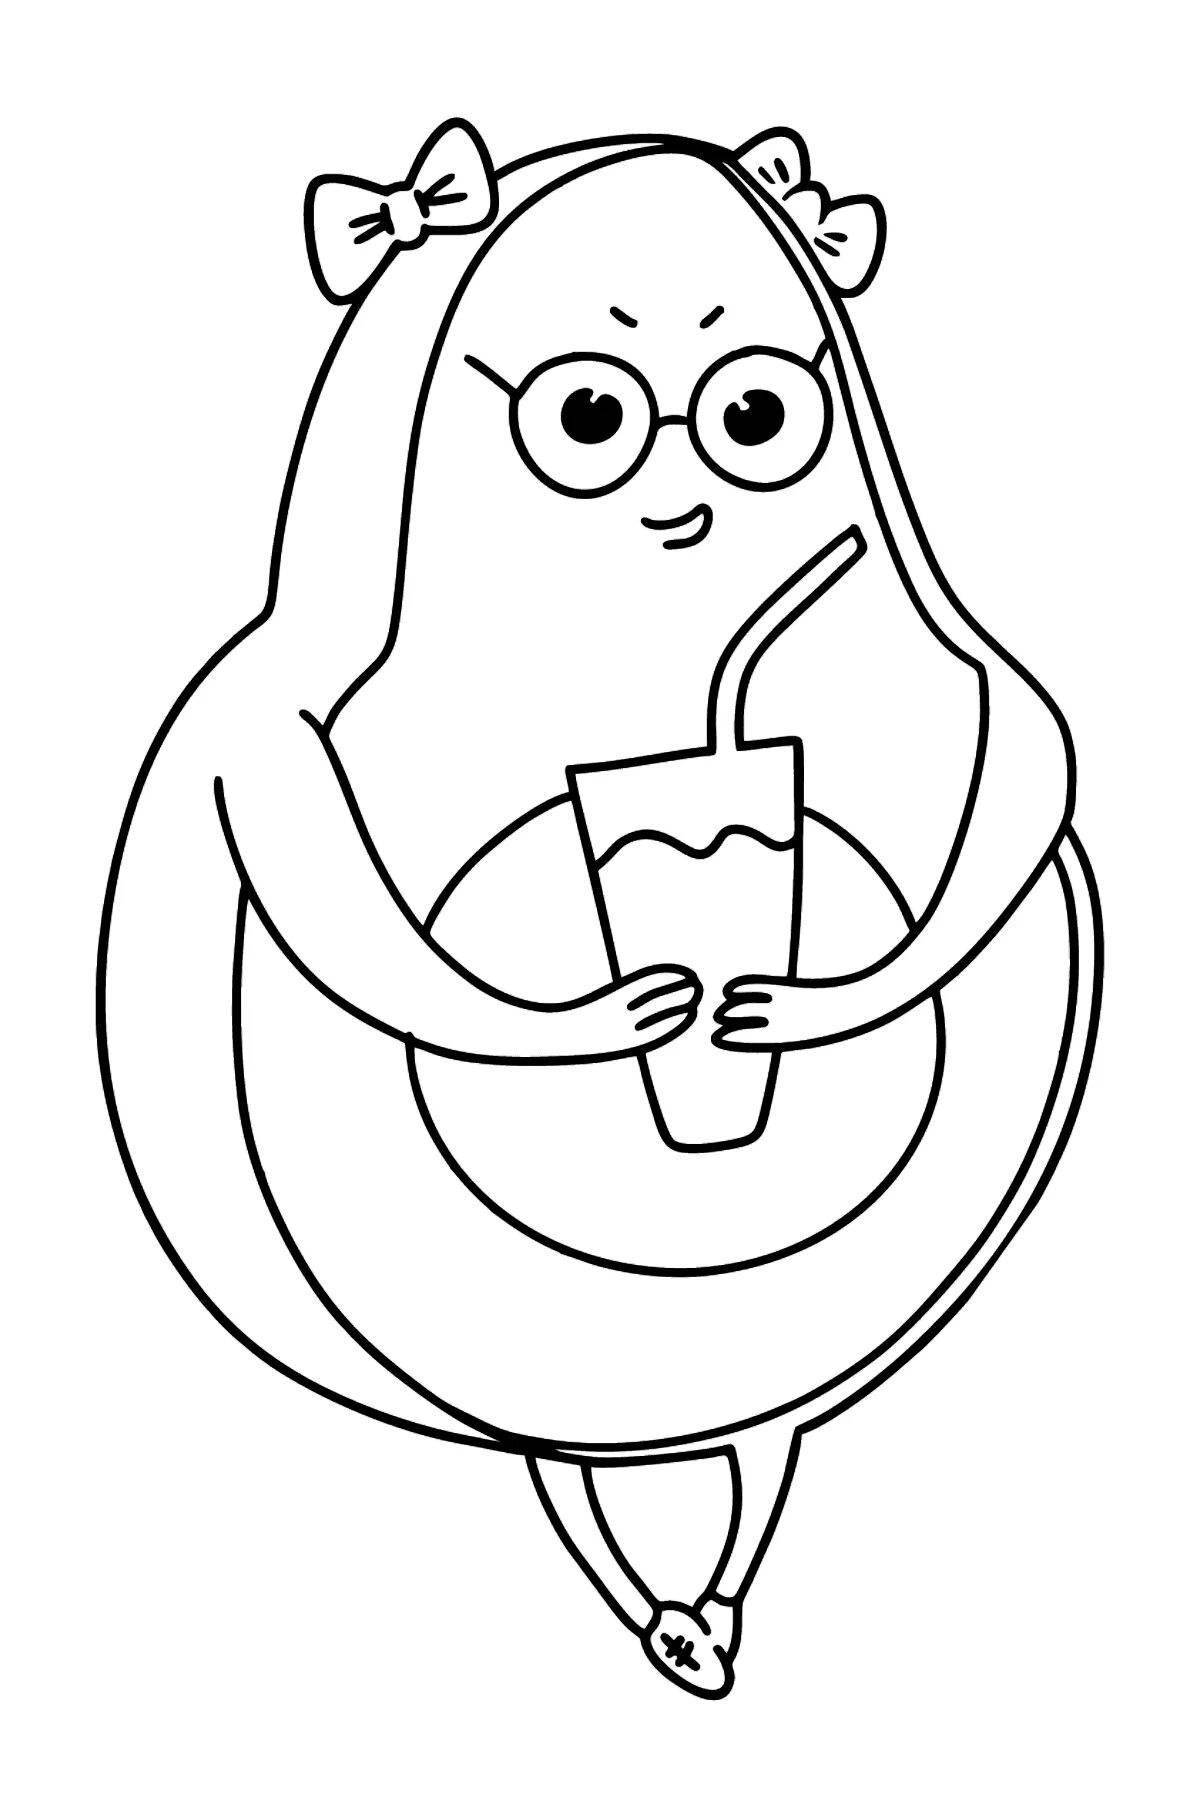 Playful avocado coloring page for kids